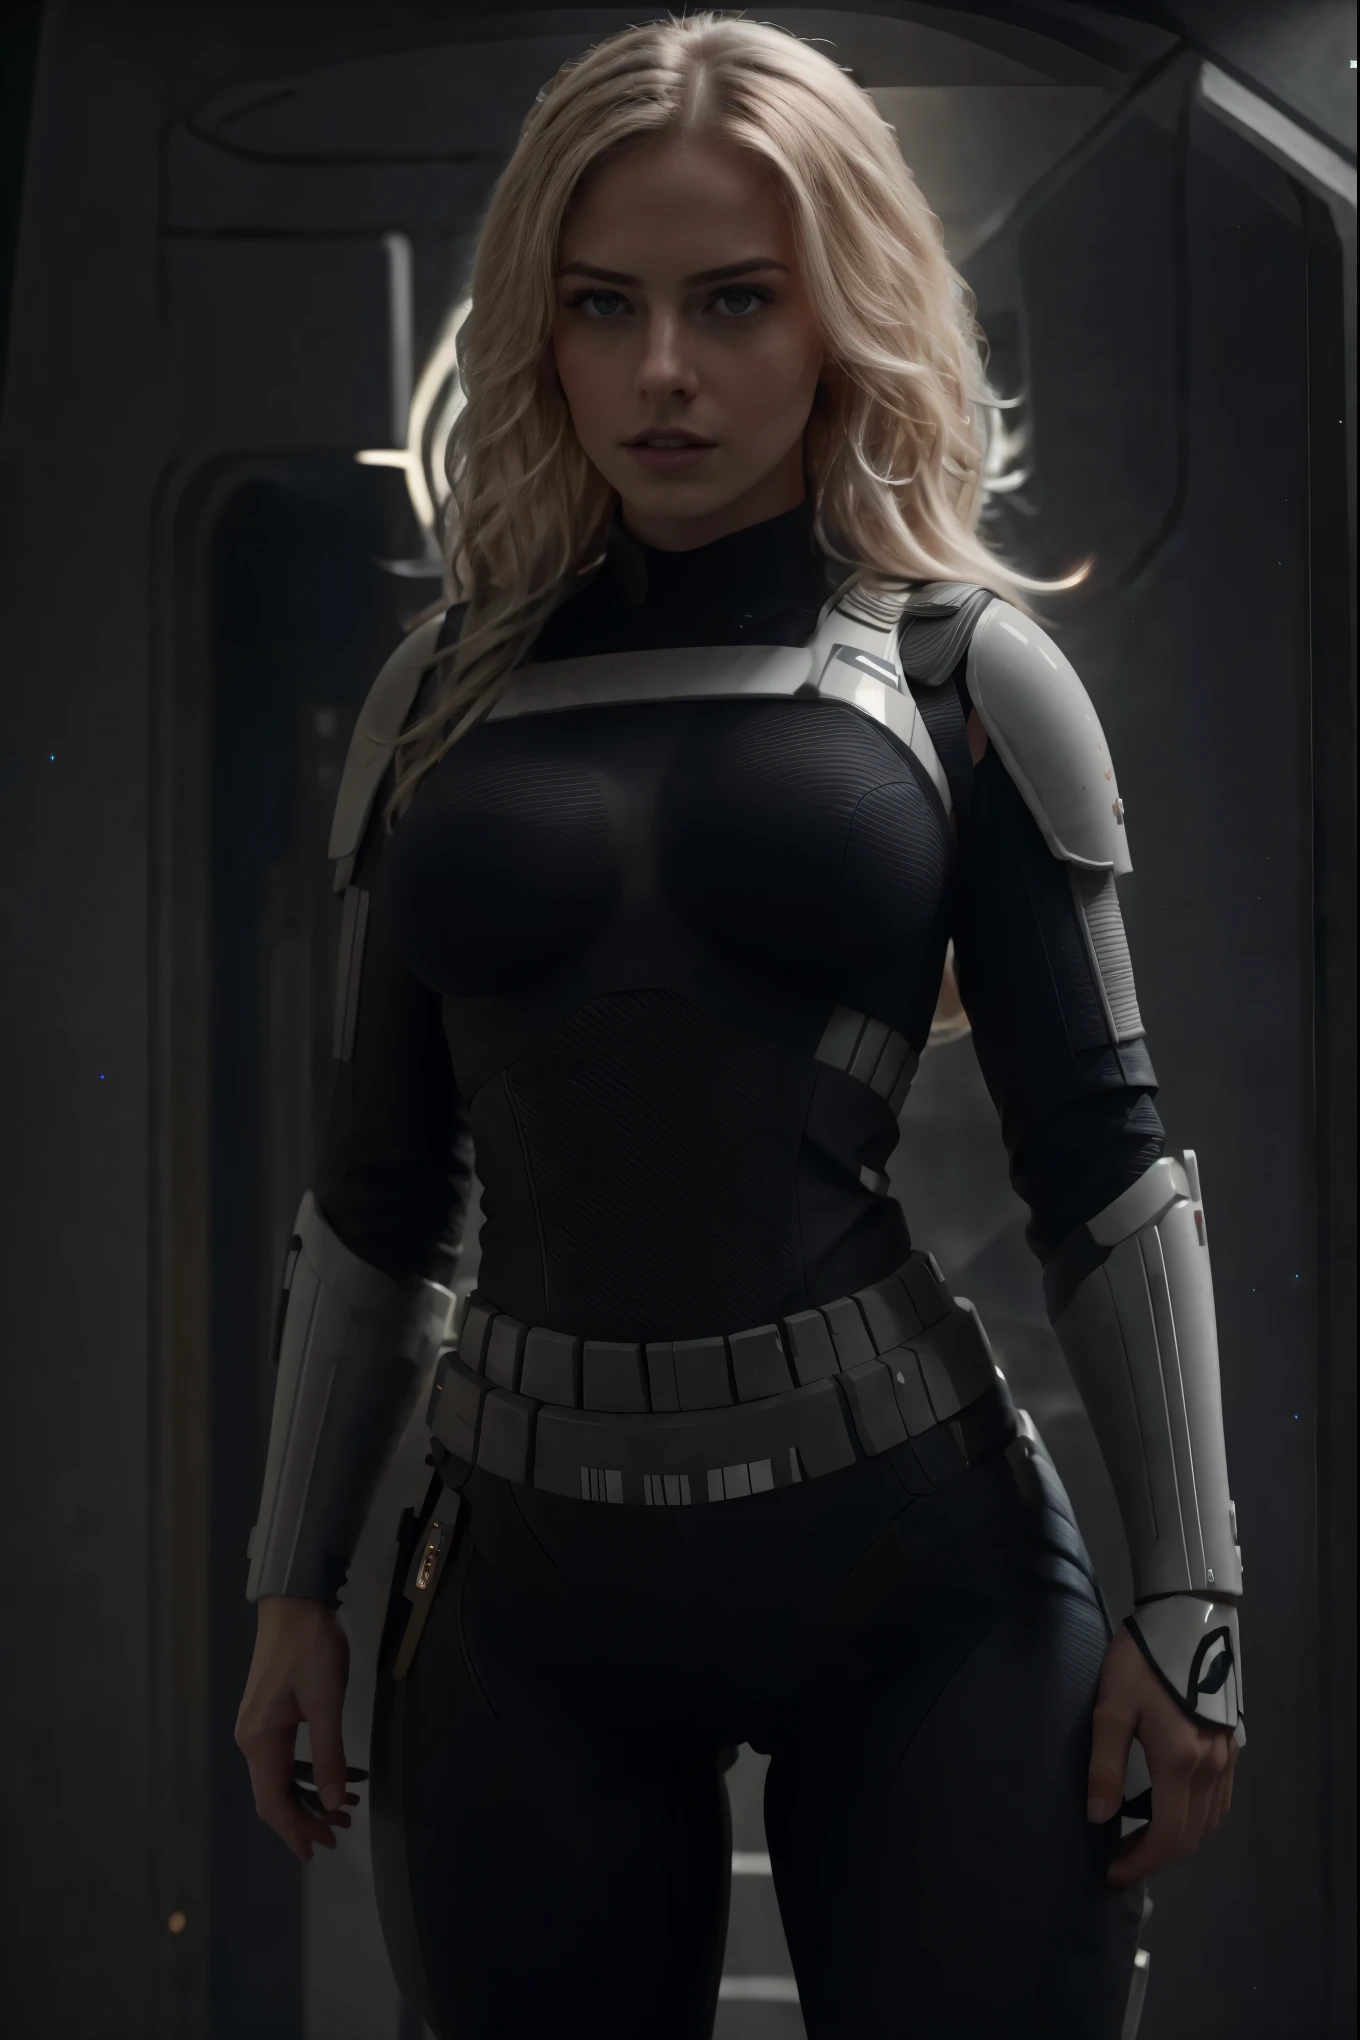 there a beautiful thick busty blonde woman in a sexy stormtrooper black armor from star wars, voluptuosa , imagen cuerpo completo, piernas largas, small waist, face with freckles, cabello rubio dorado largo, ojos azules, labios gruesos, pose sexy, trasero redondo, futuristic starship crew member, solo female character, hyper realistic sci fi realistic, cinematic highly detailed, sci fi female character, 8 k high detail and intricate, sci-fi female, highly detailed vfx portrait of, sci-fi highly detailed